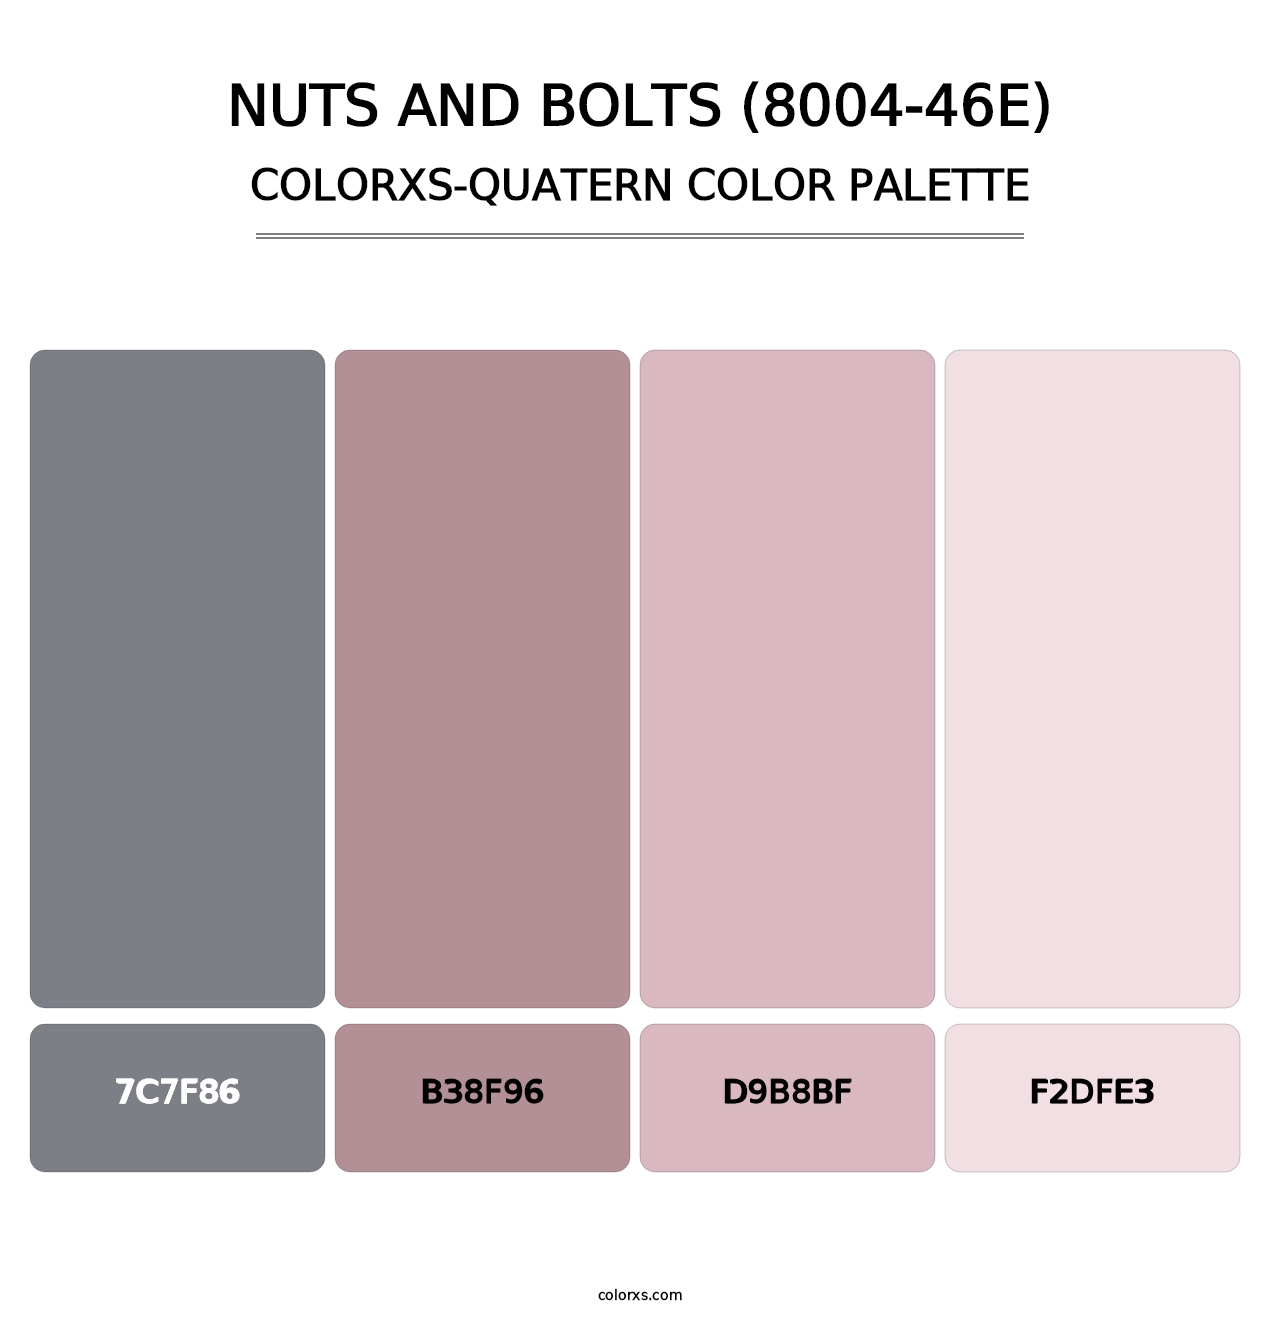 Nuts and Bolts (8004-46E) - Colorxs Quatern Palette